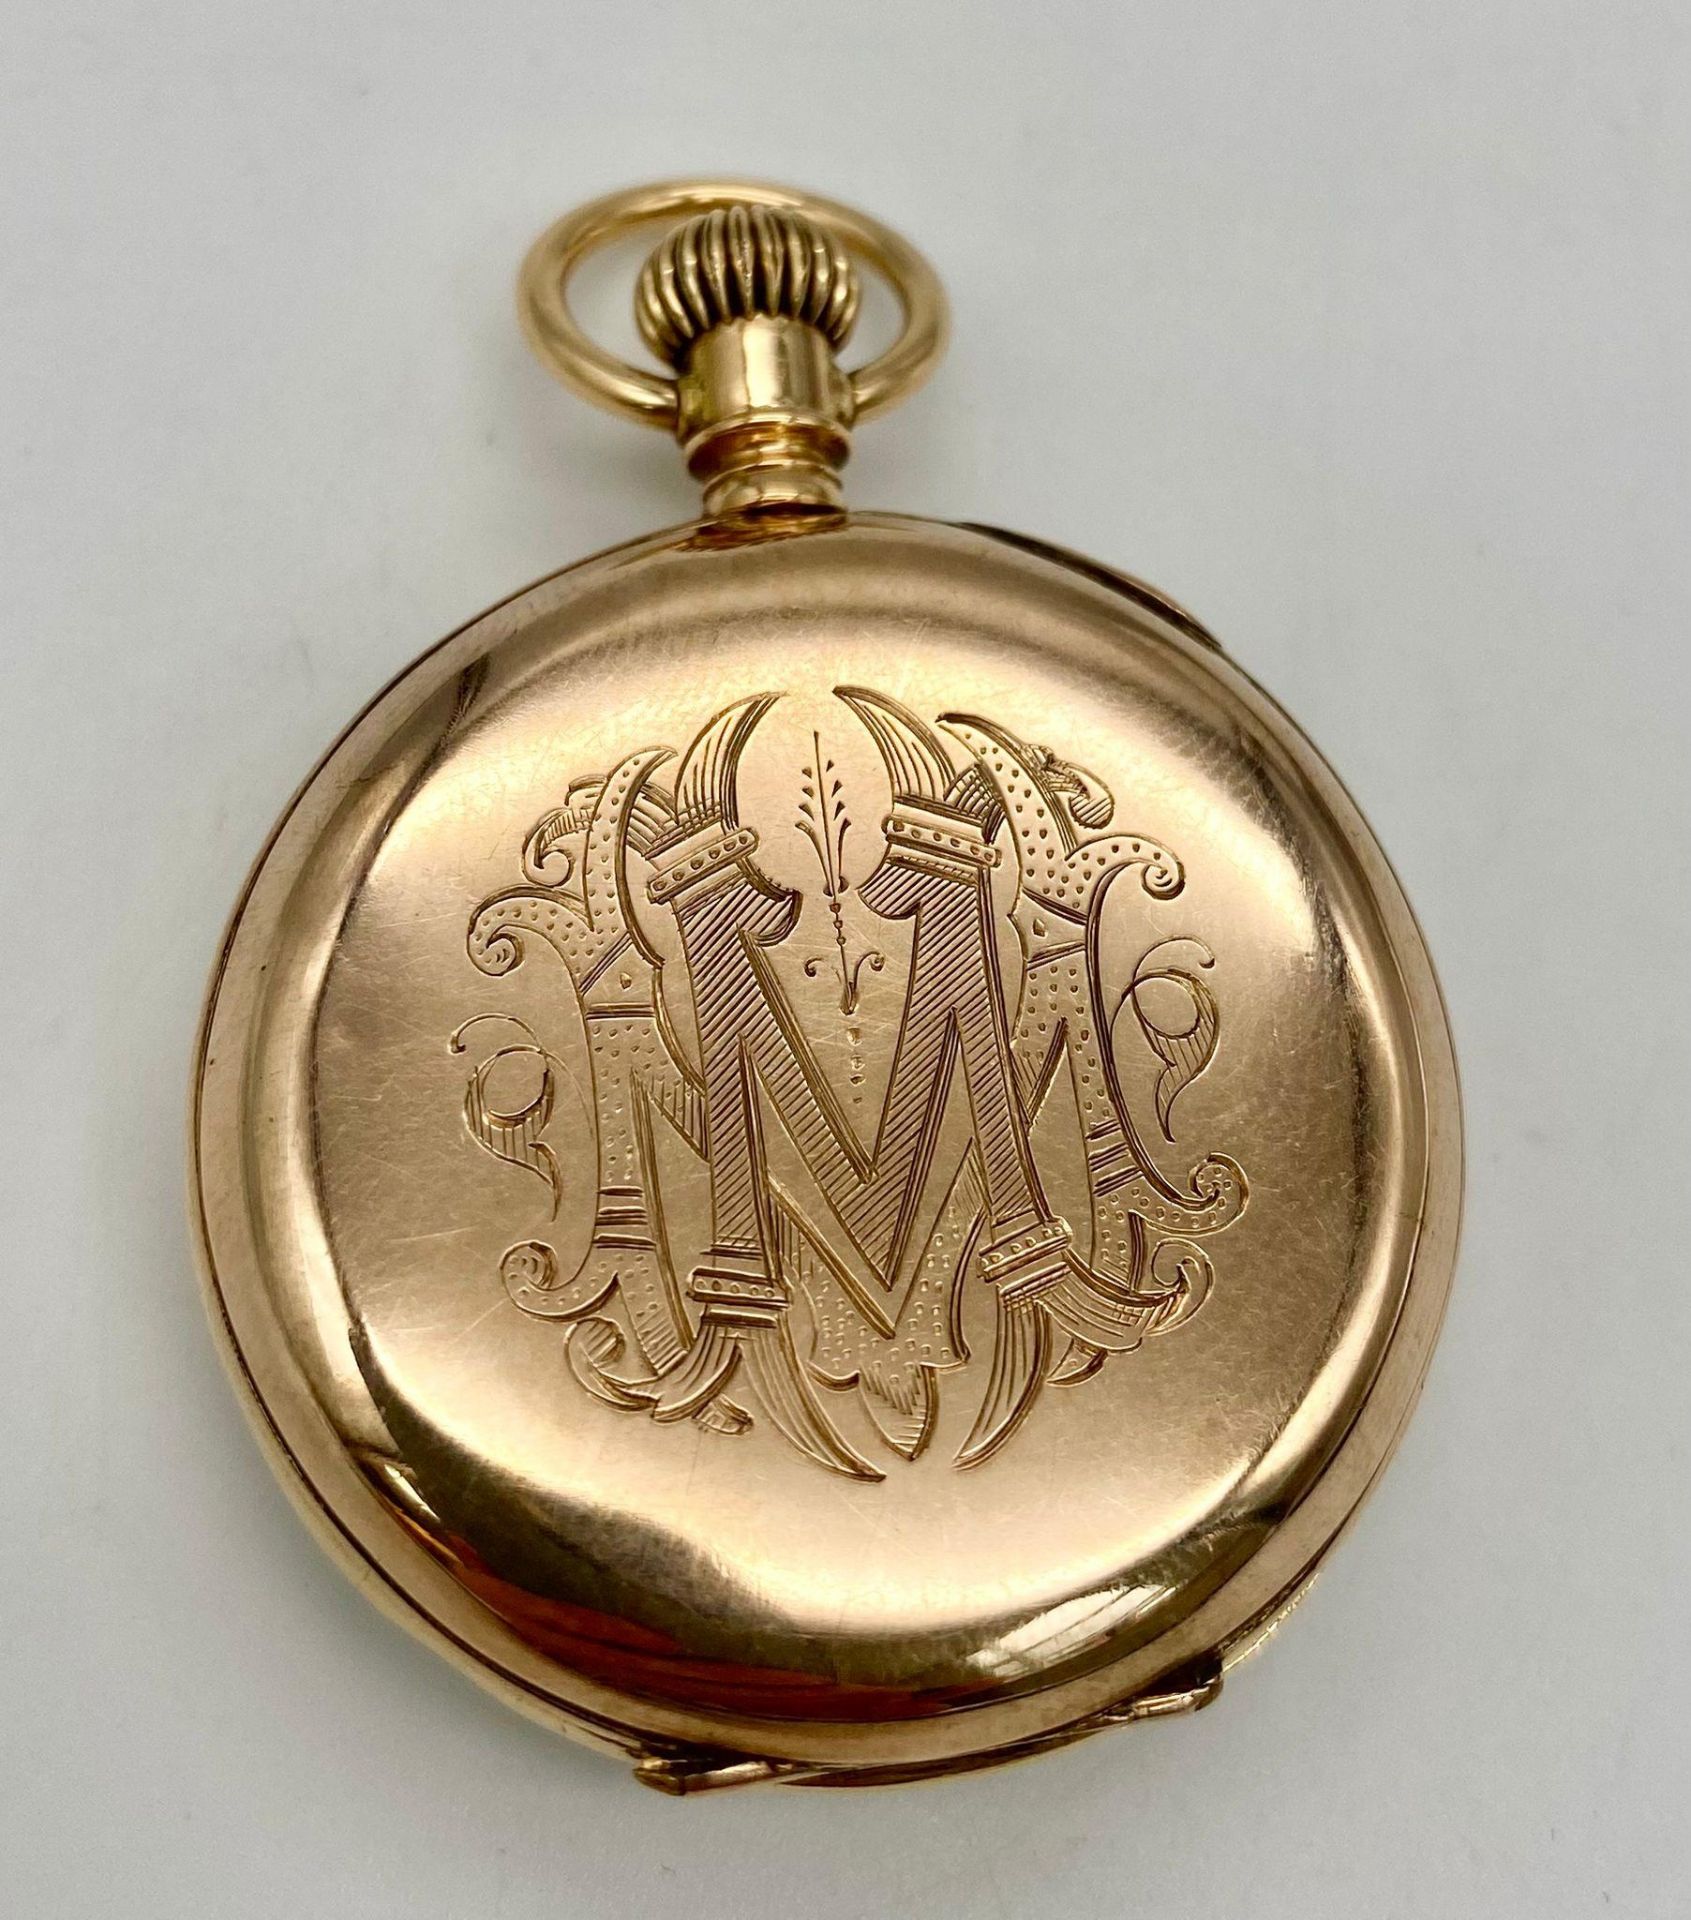 An Antique (1891) 10K Gold Cased Waltham Small Pocket Watch. Rare - only 1 of 5600 made. 13 - Image 2 of 4